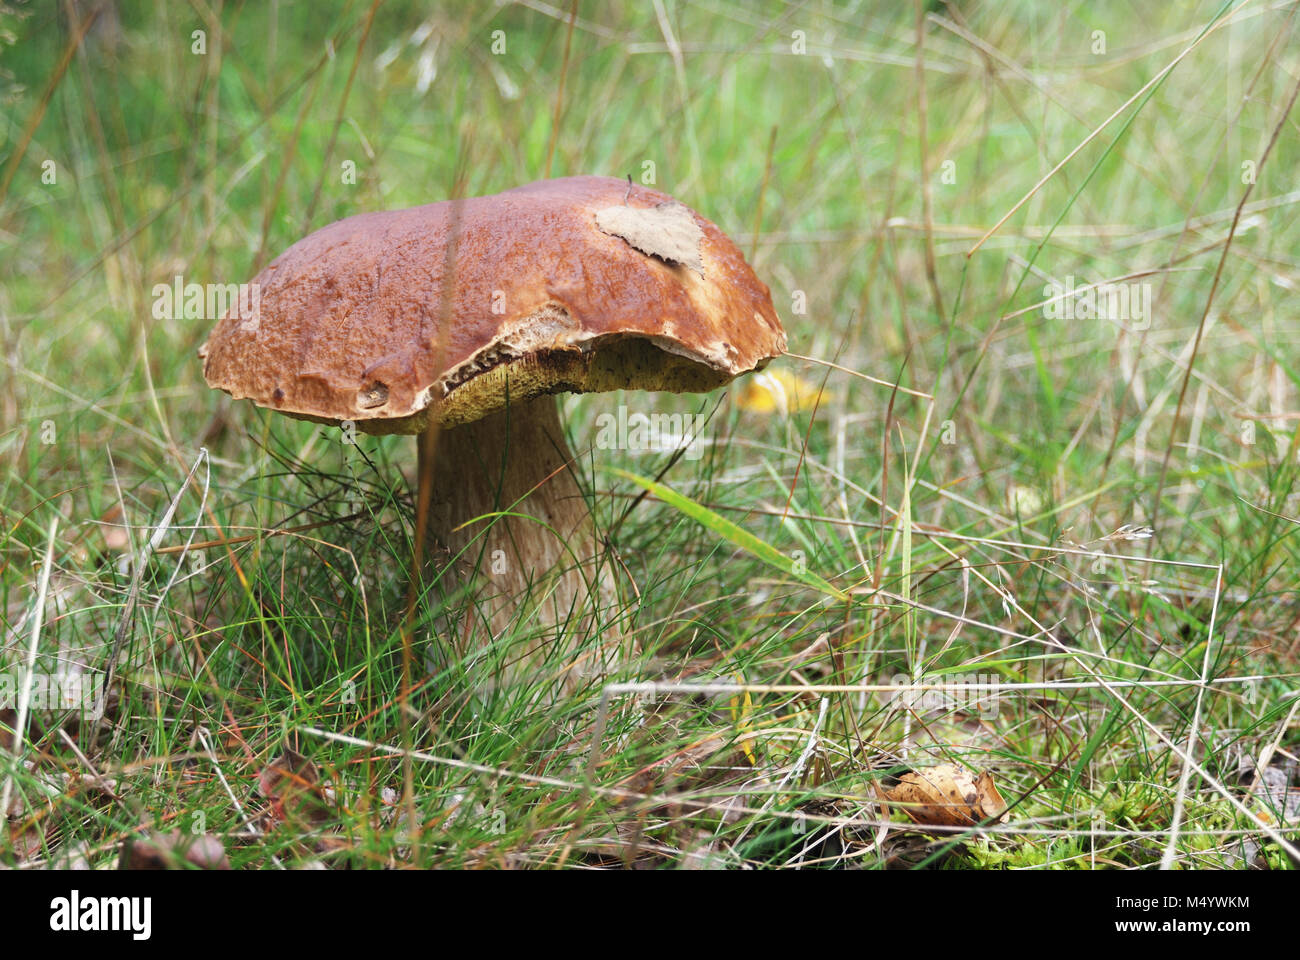 very beatiful cep in natural enviroment Stock Photo